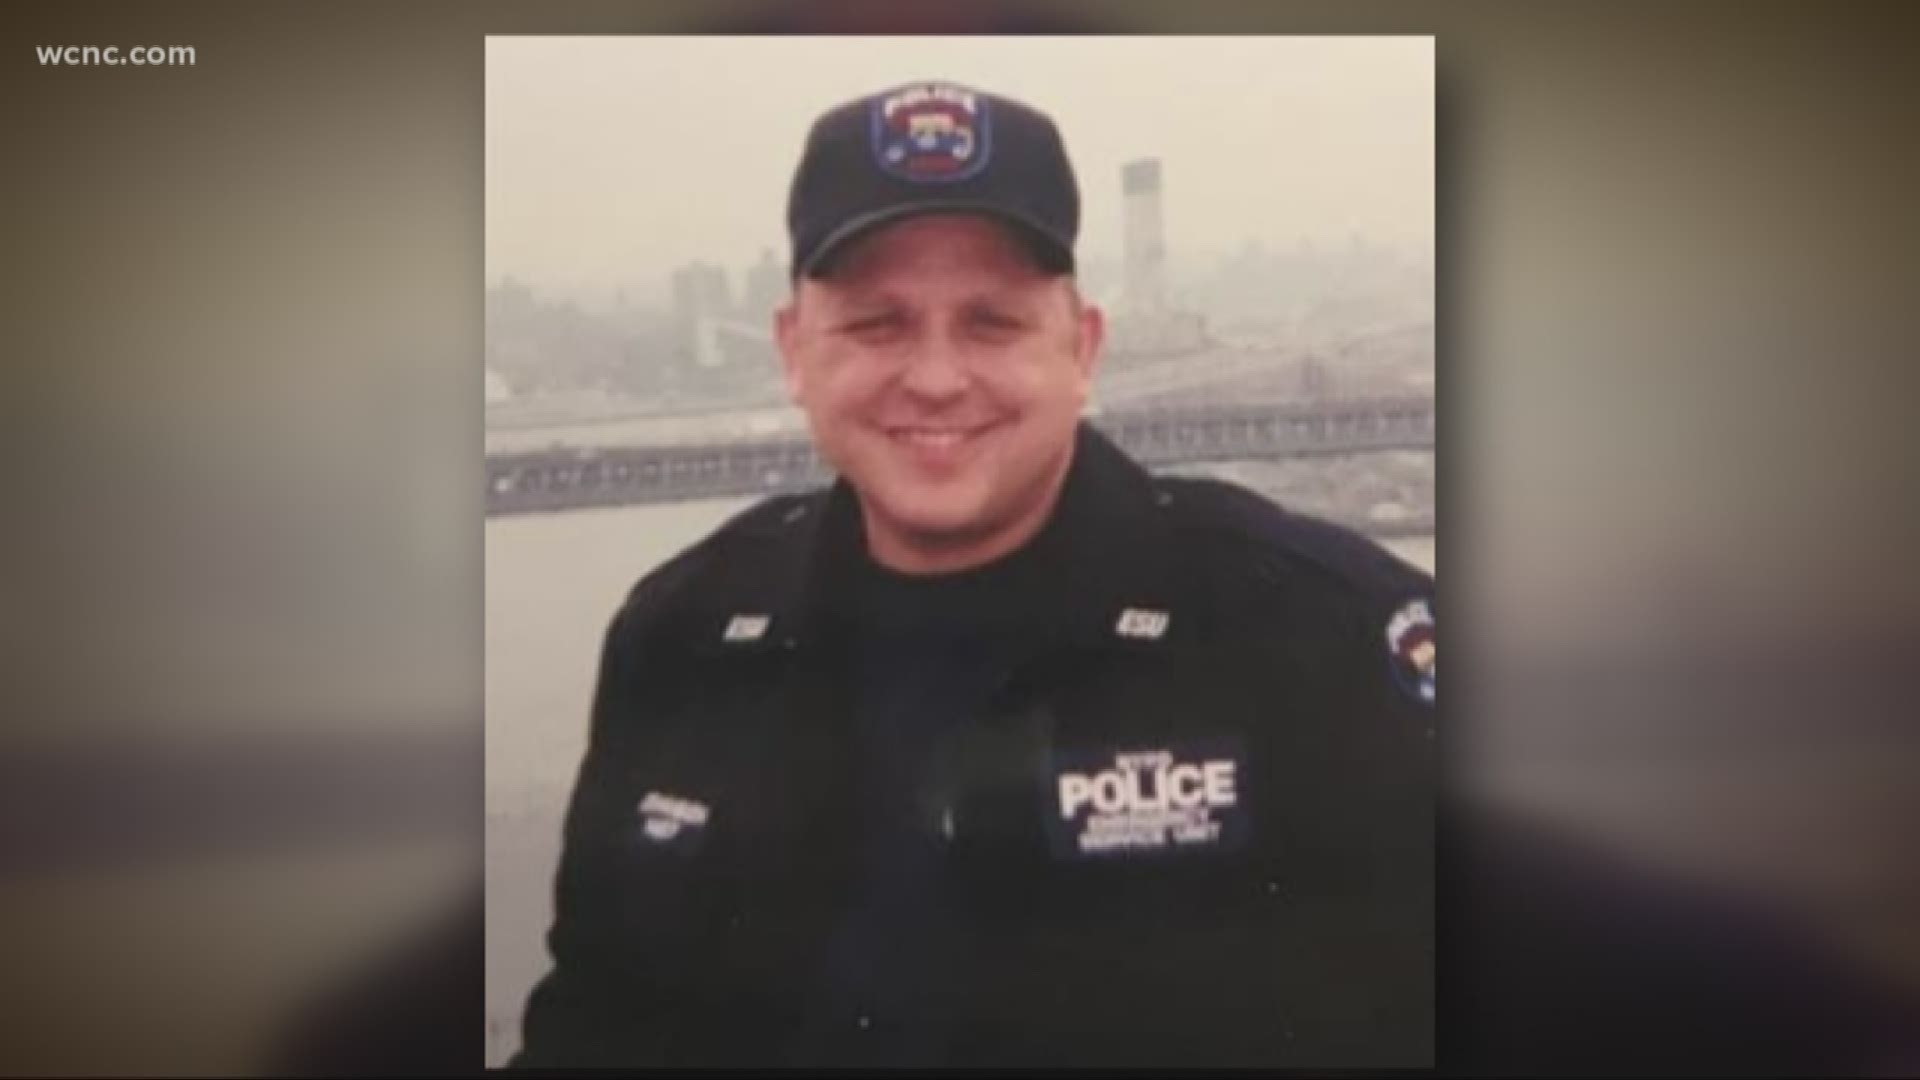 Paul Johnson was an officer for the New York Police Department before moving to York County. Last week, Johnson died from the lung disease he contracted after the 9/11 attacks.